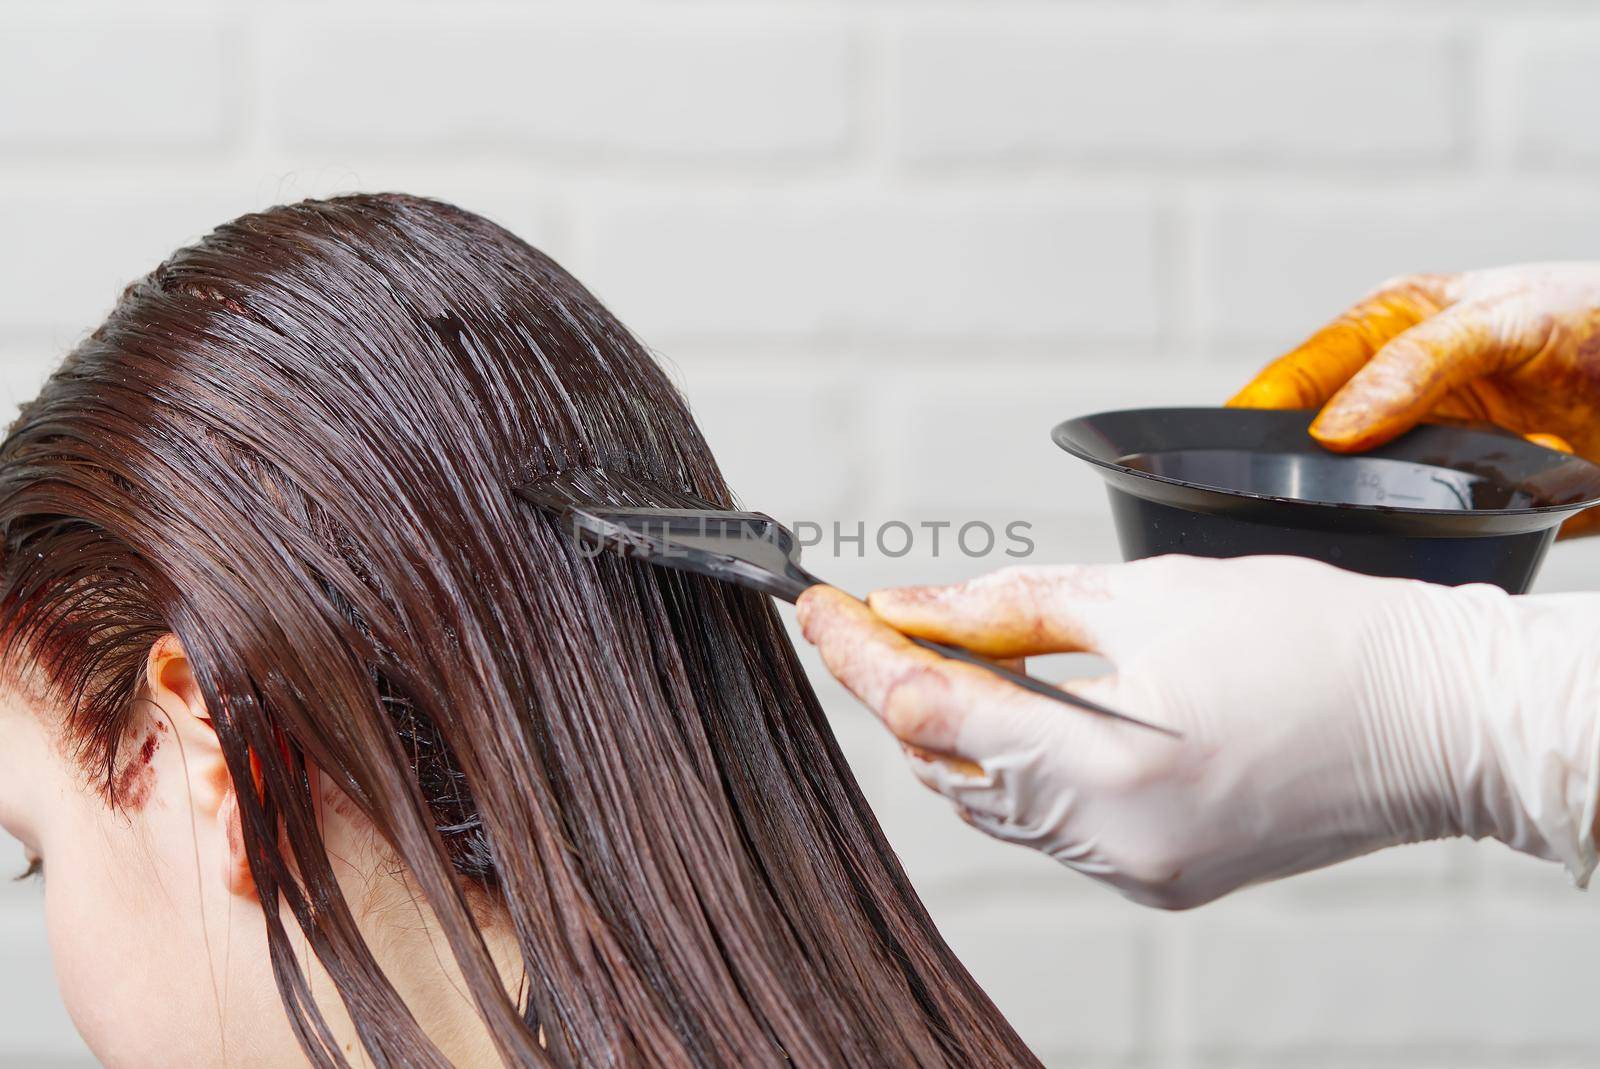 The hairdresser paints the woman's hair in a dark color, apply the paint to her hair. Getting beauty procedures. Barber hair dye is applied with a brush